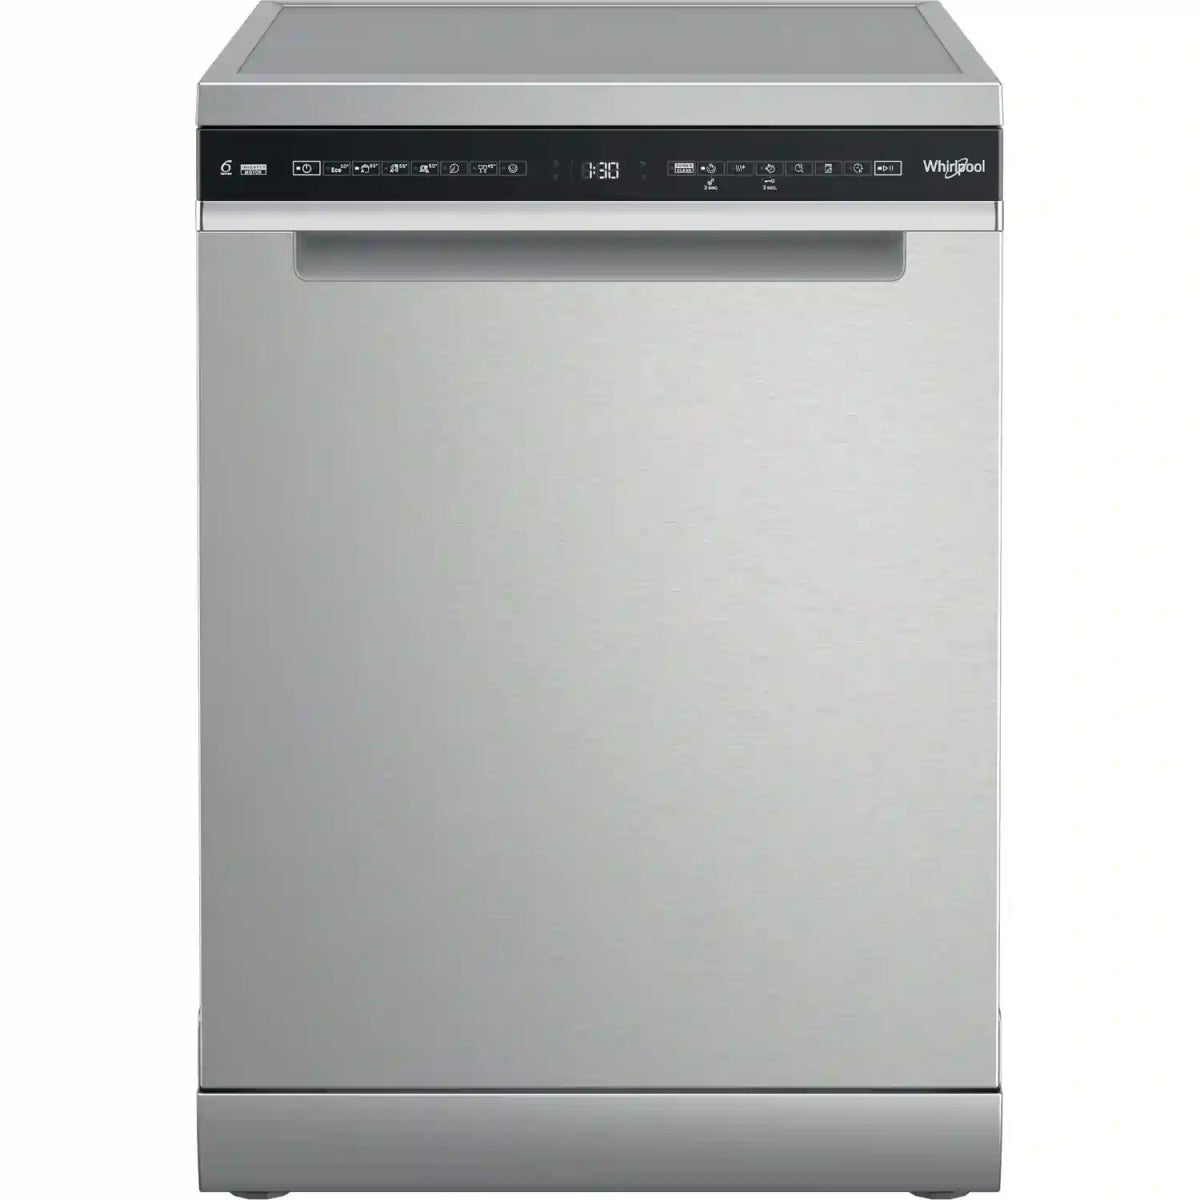 Whirlpool W7FHS51X Freestanding Dishwasher 15 Place - Stainless steel - Atlantic Electrics